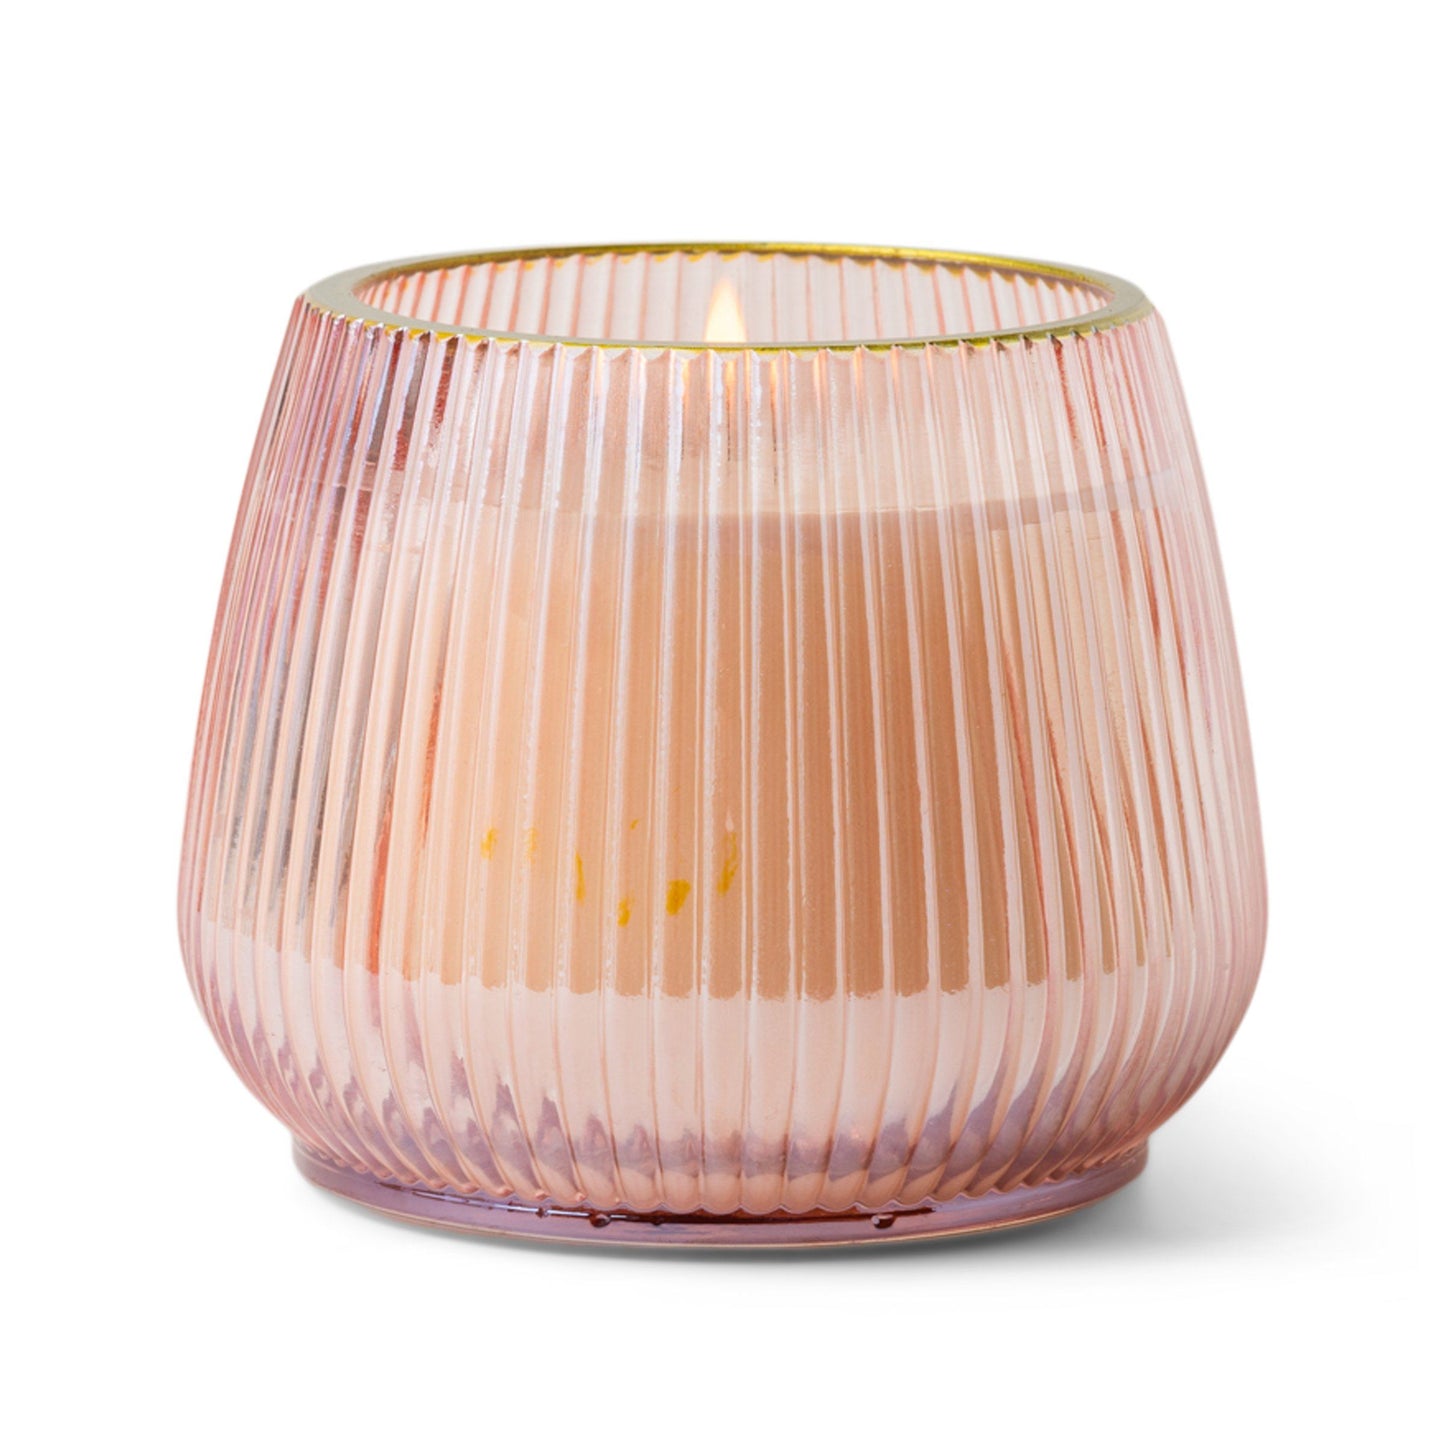 Lum 12 oz Candle - Applewood + Spice - pink colored vessel